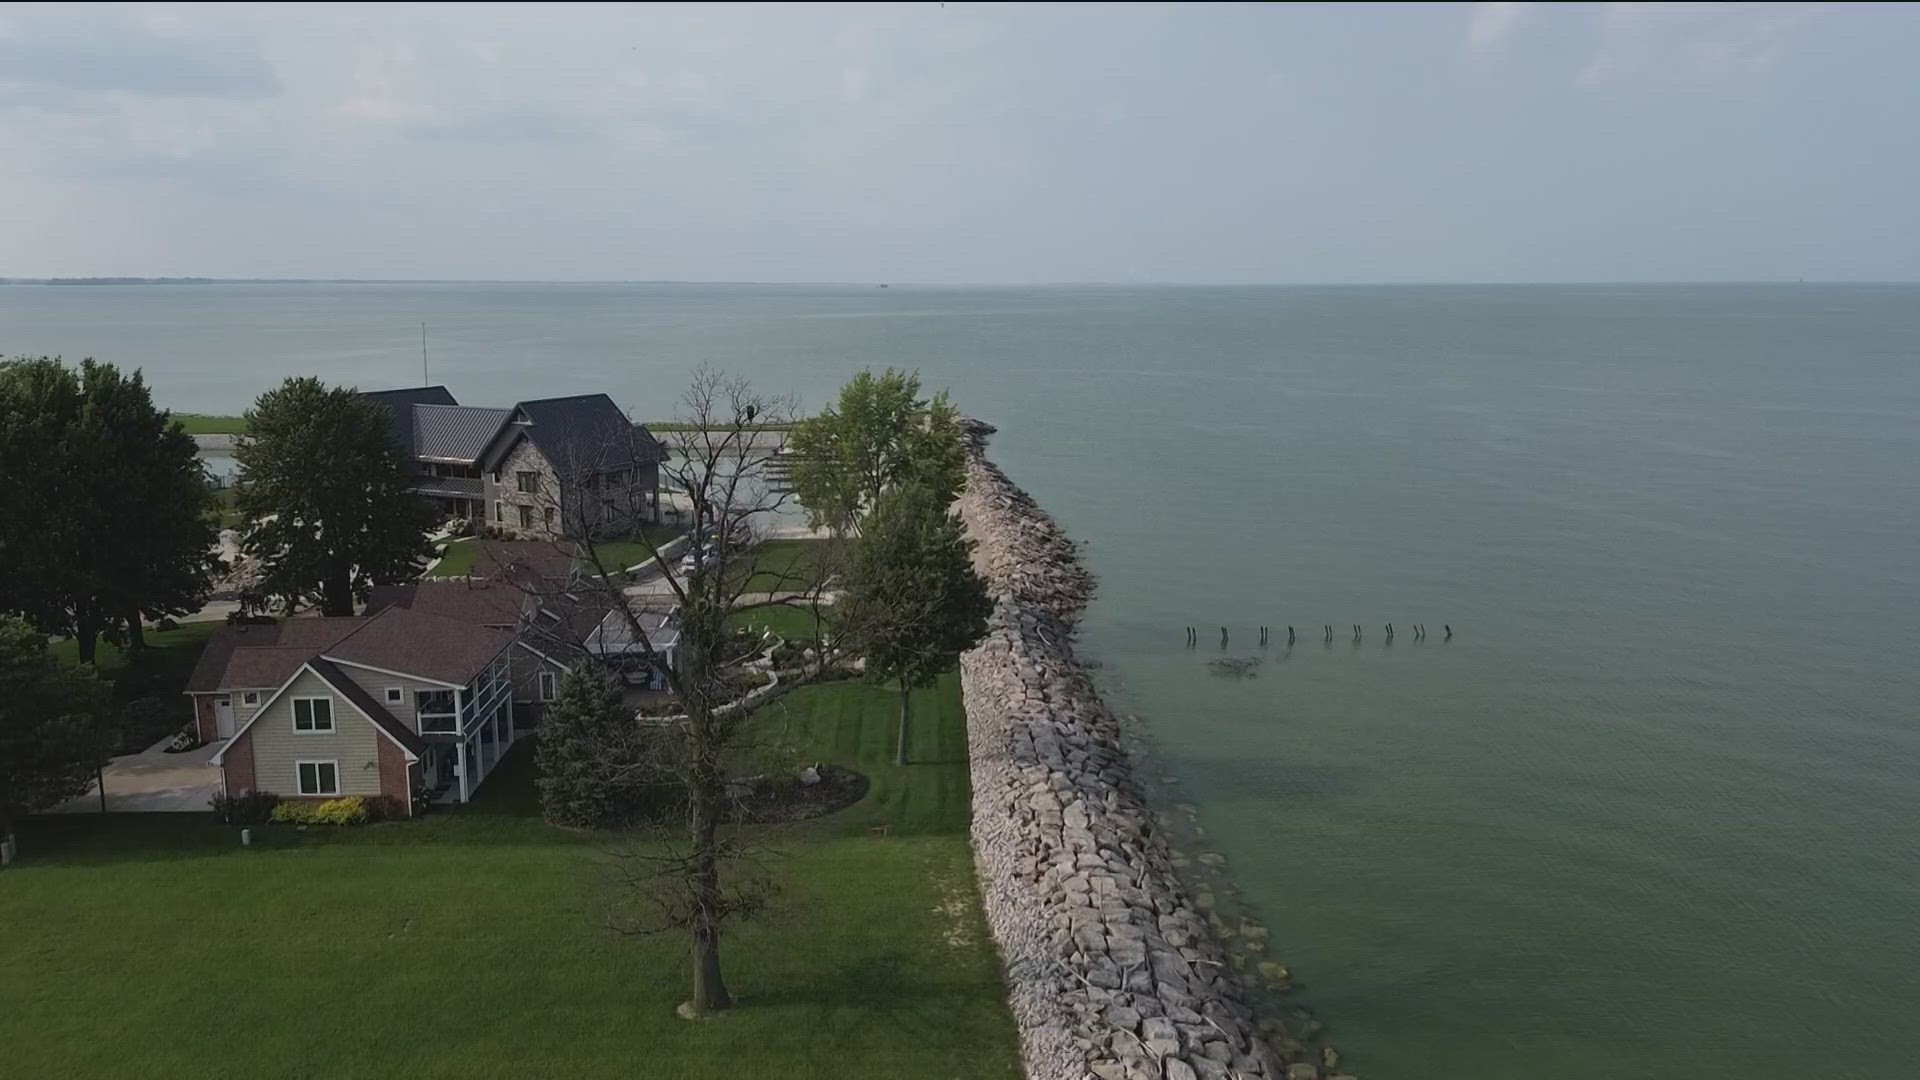 Lake Erie was covered in thick algae bloom during the water crisis in northwest Ohio and southeast Michigan. Residents had to avoid using their own tap for days.